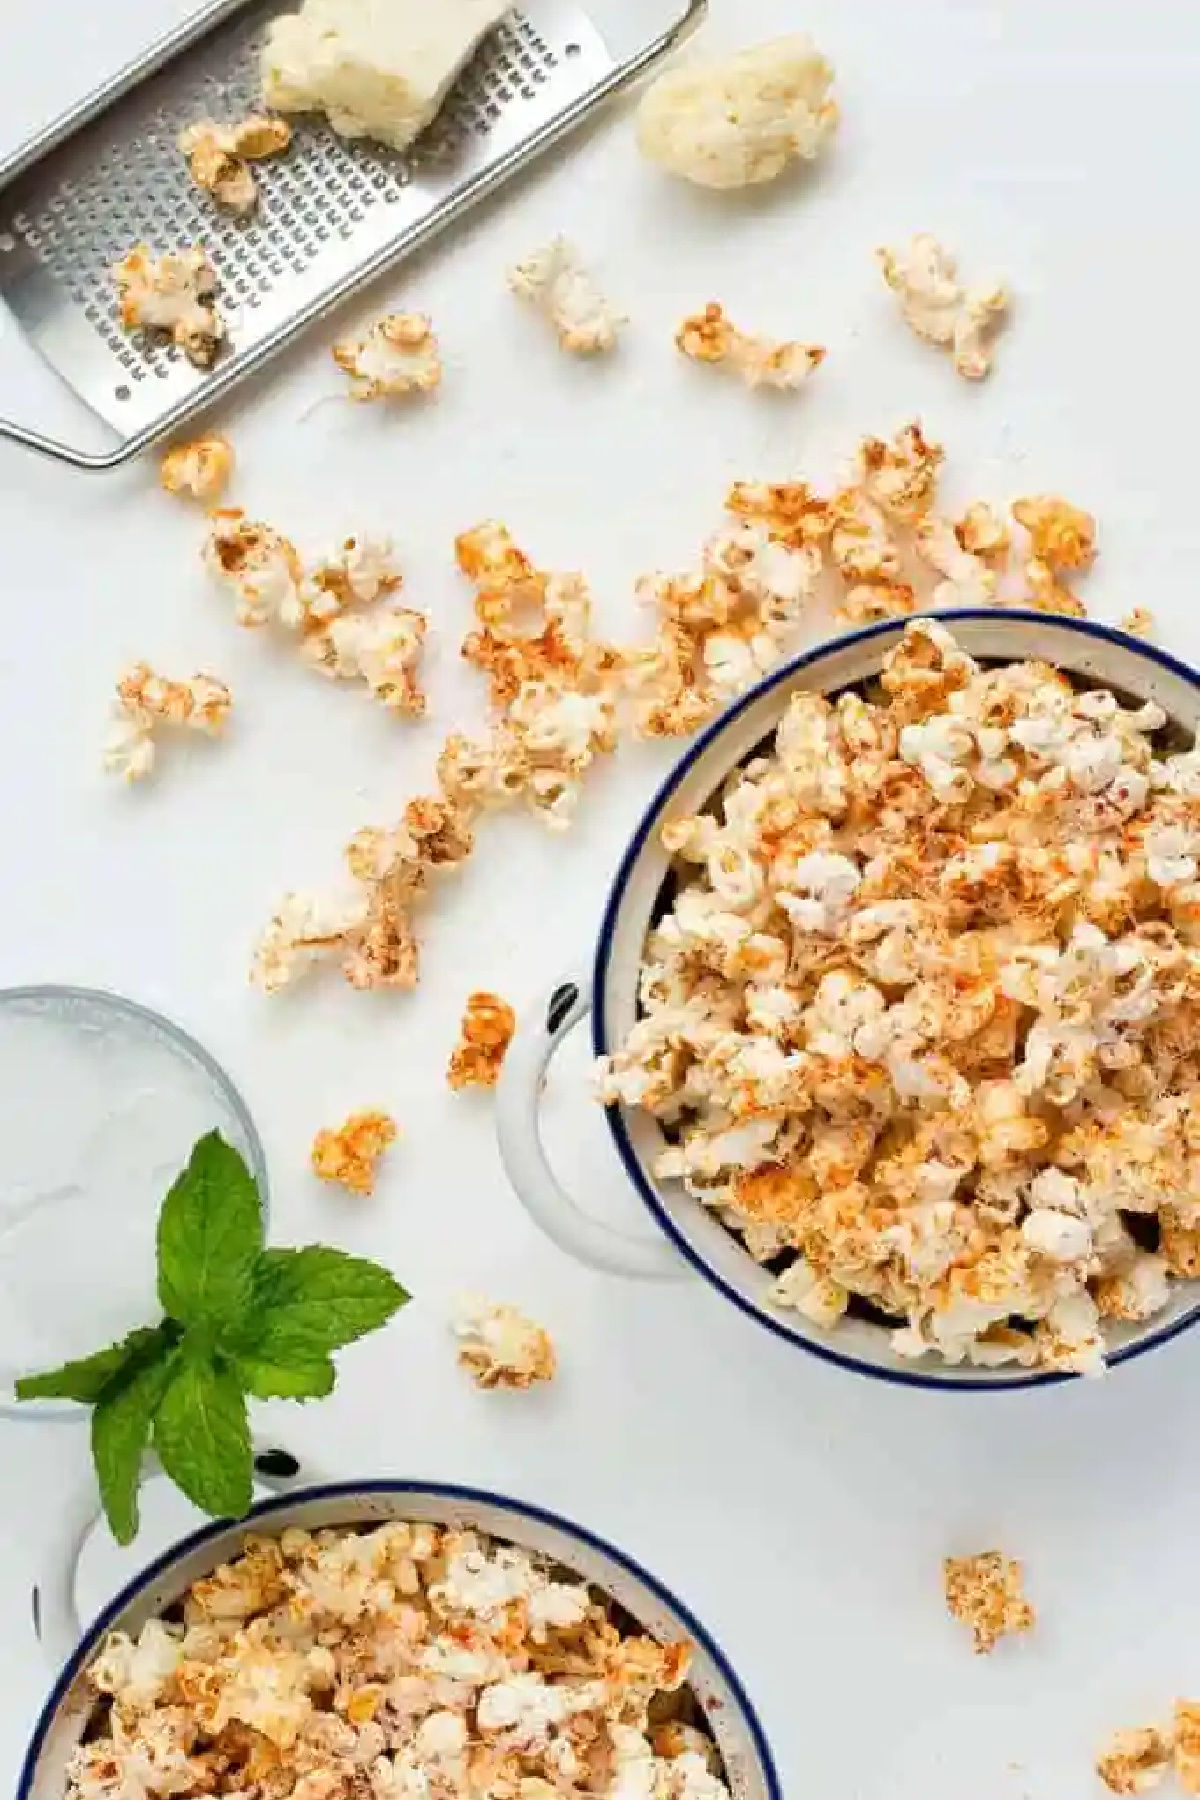 Spicy Parmesan Popcorn - a tasty and cheap party food idea